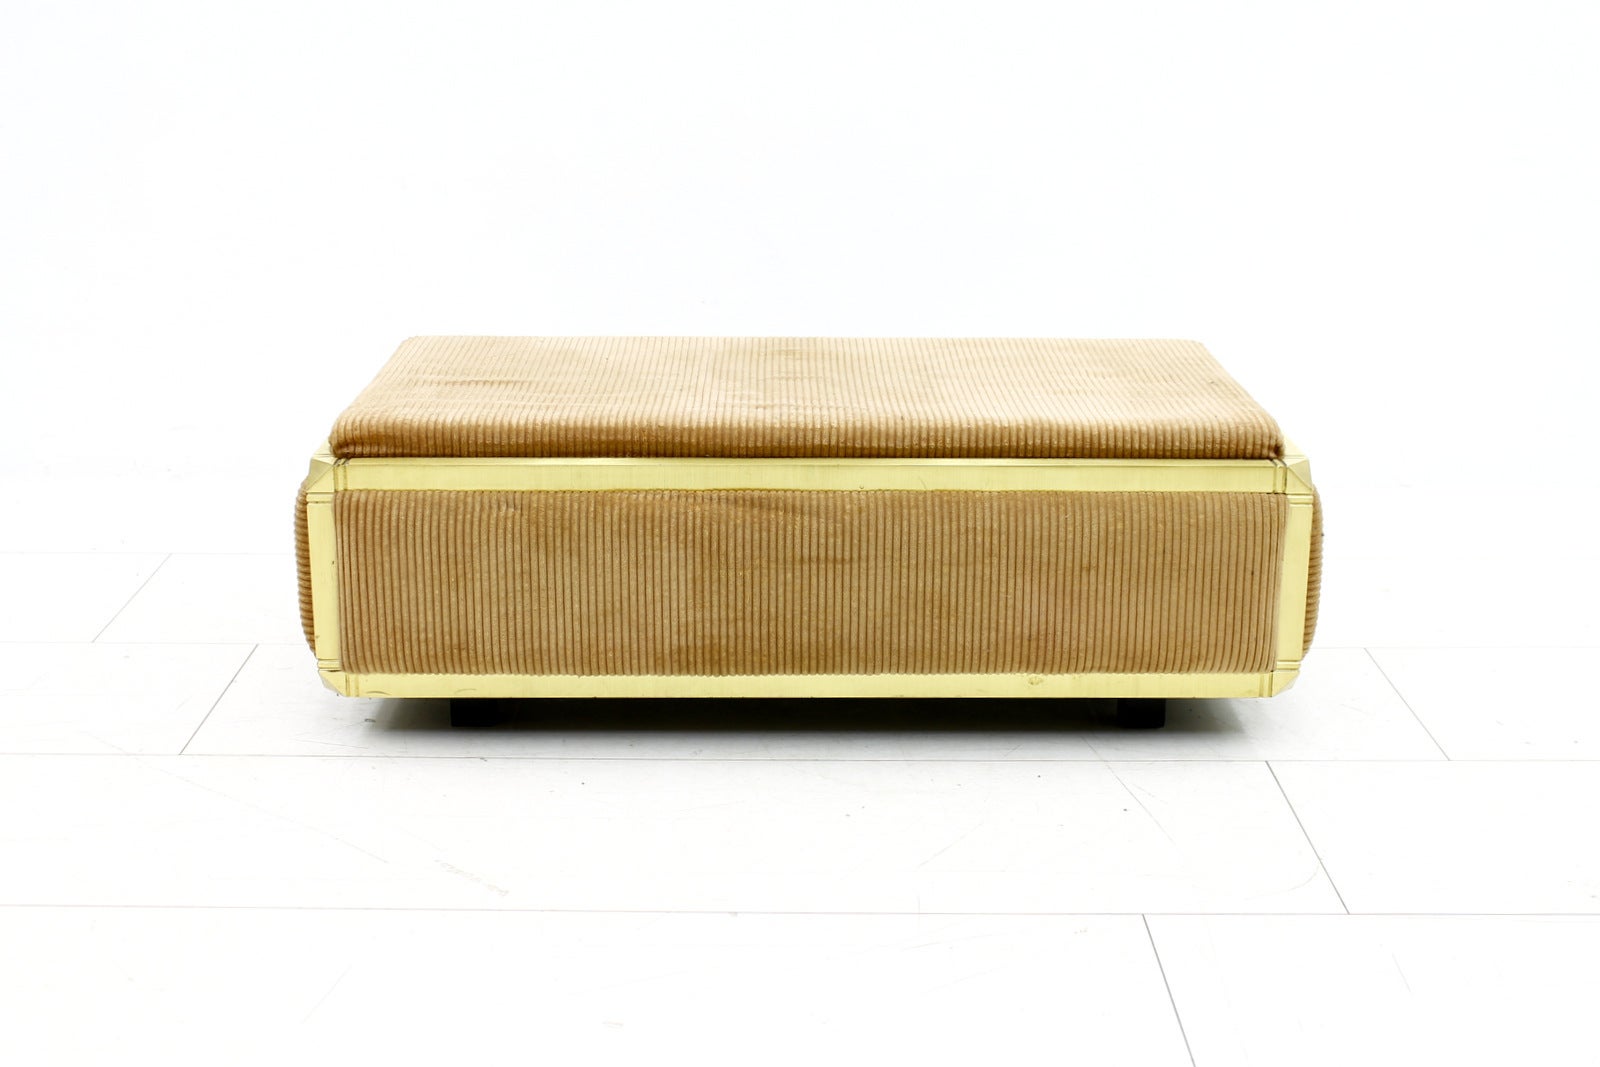 Brass & Fabric Bench, Stool, France 1980s For Sale